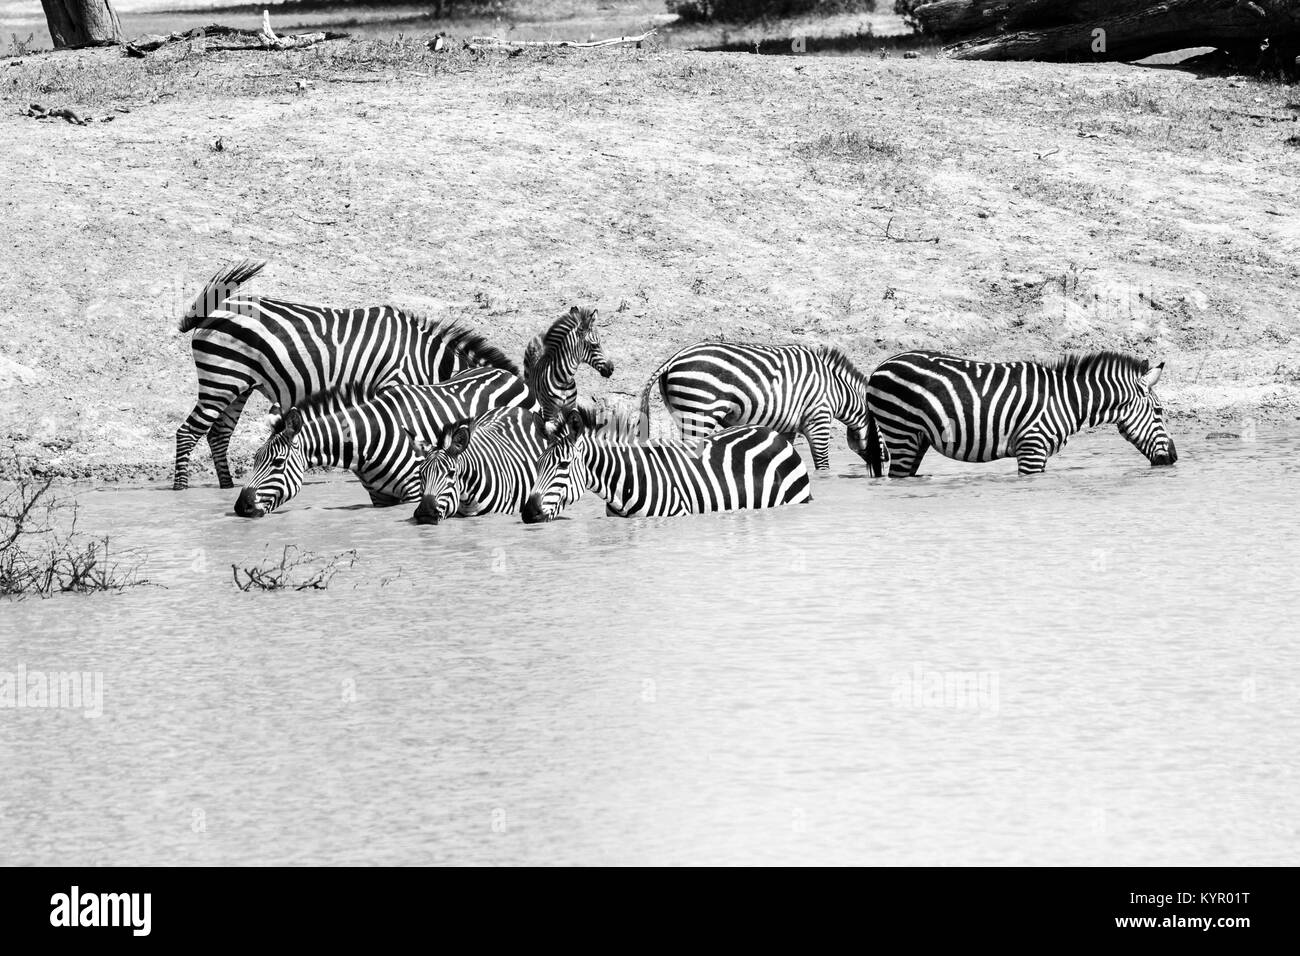 Zebra species of African equids (horse family) united by their distinctive black and white striped coats in different patterns, unique to each individ Stock Photo